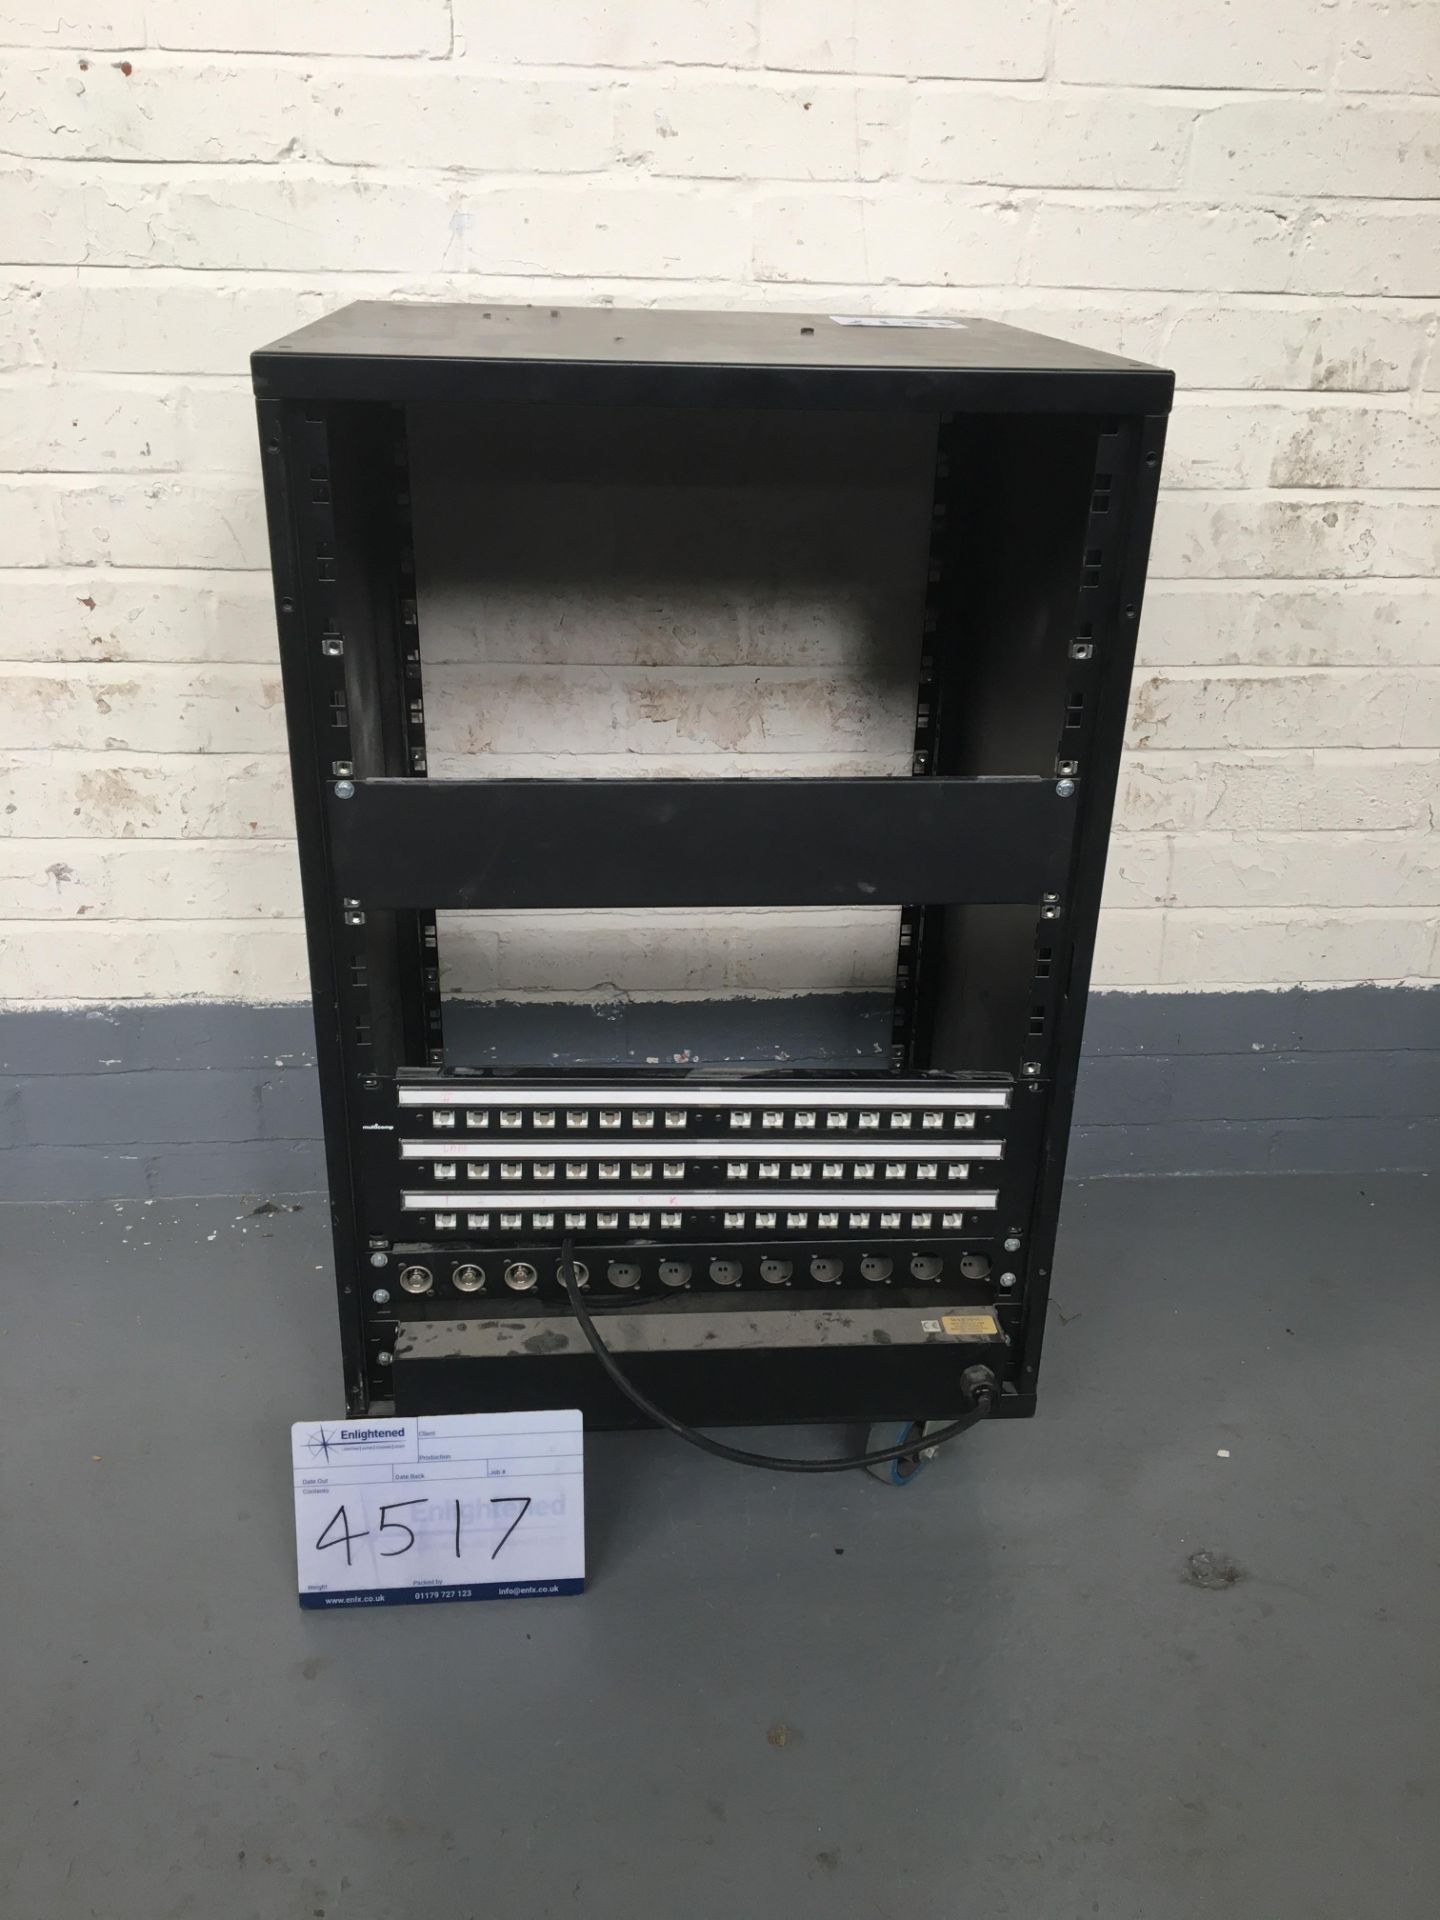 16U 19" Server AV Rack on wheels w/ Patch Panel. 480*520*765mm. Condition: Used Removed from